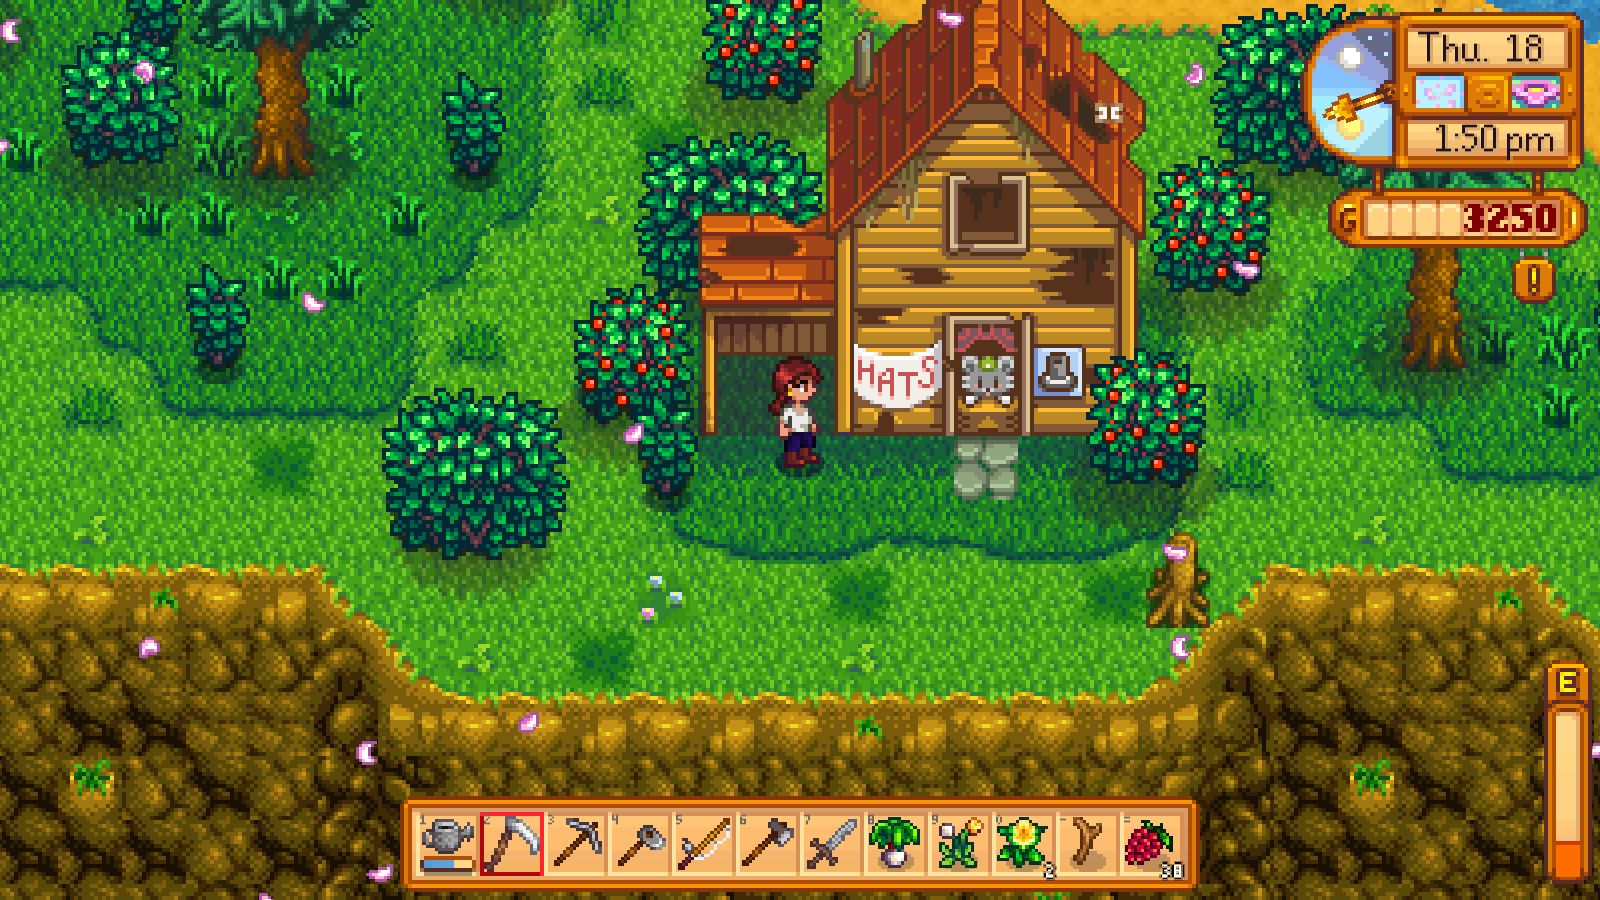 Stardew Valley review | PC Gamer